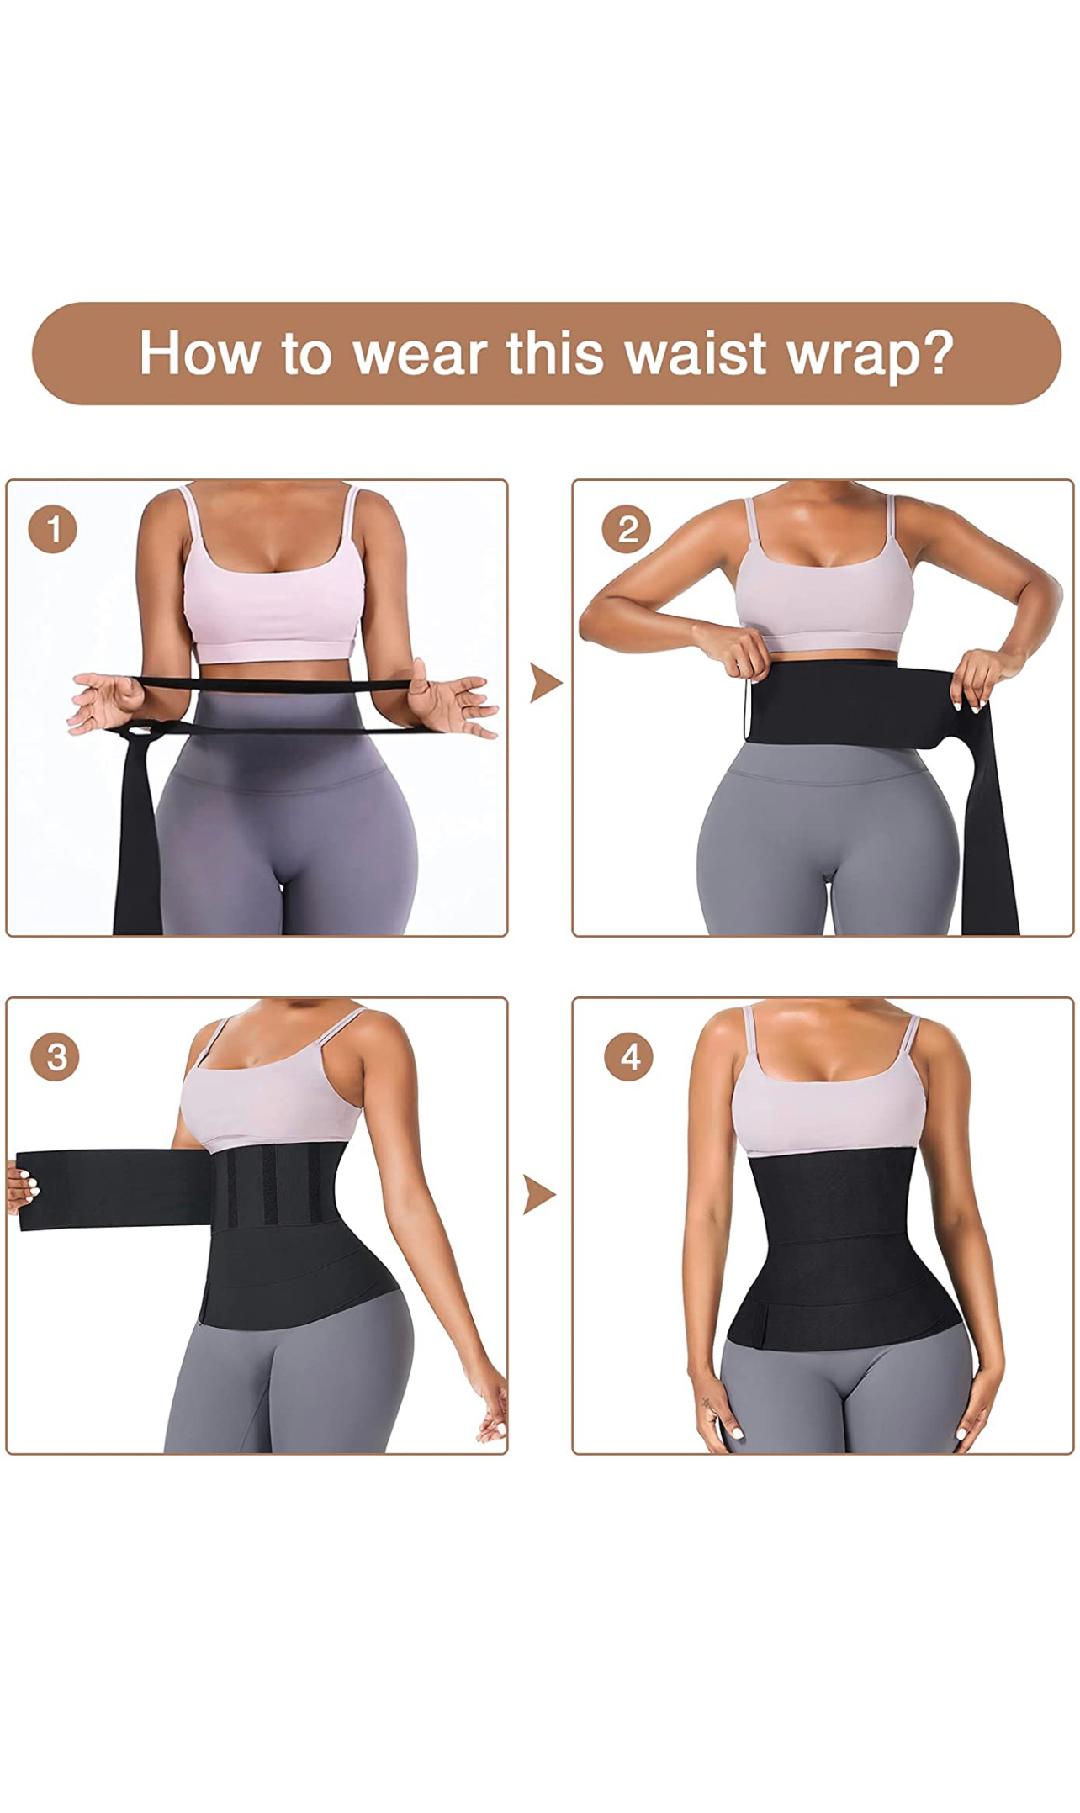 INVISIBLE WRAP WAIST TRAINER 4M